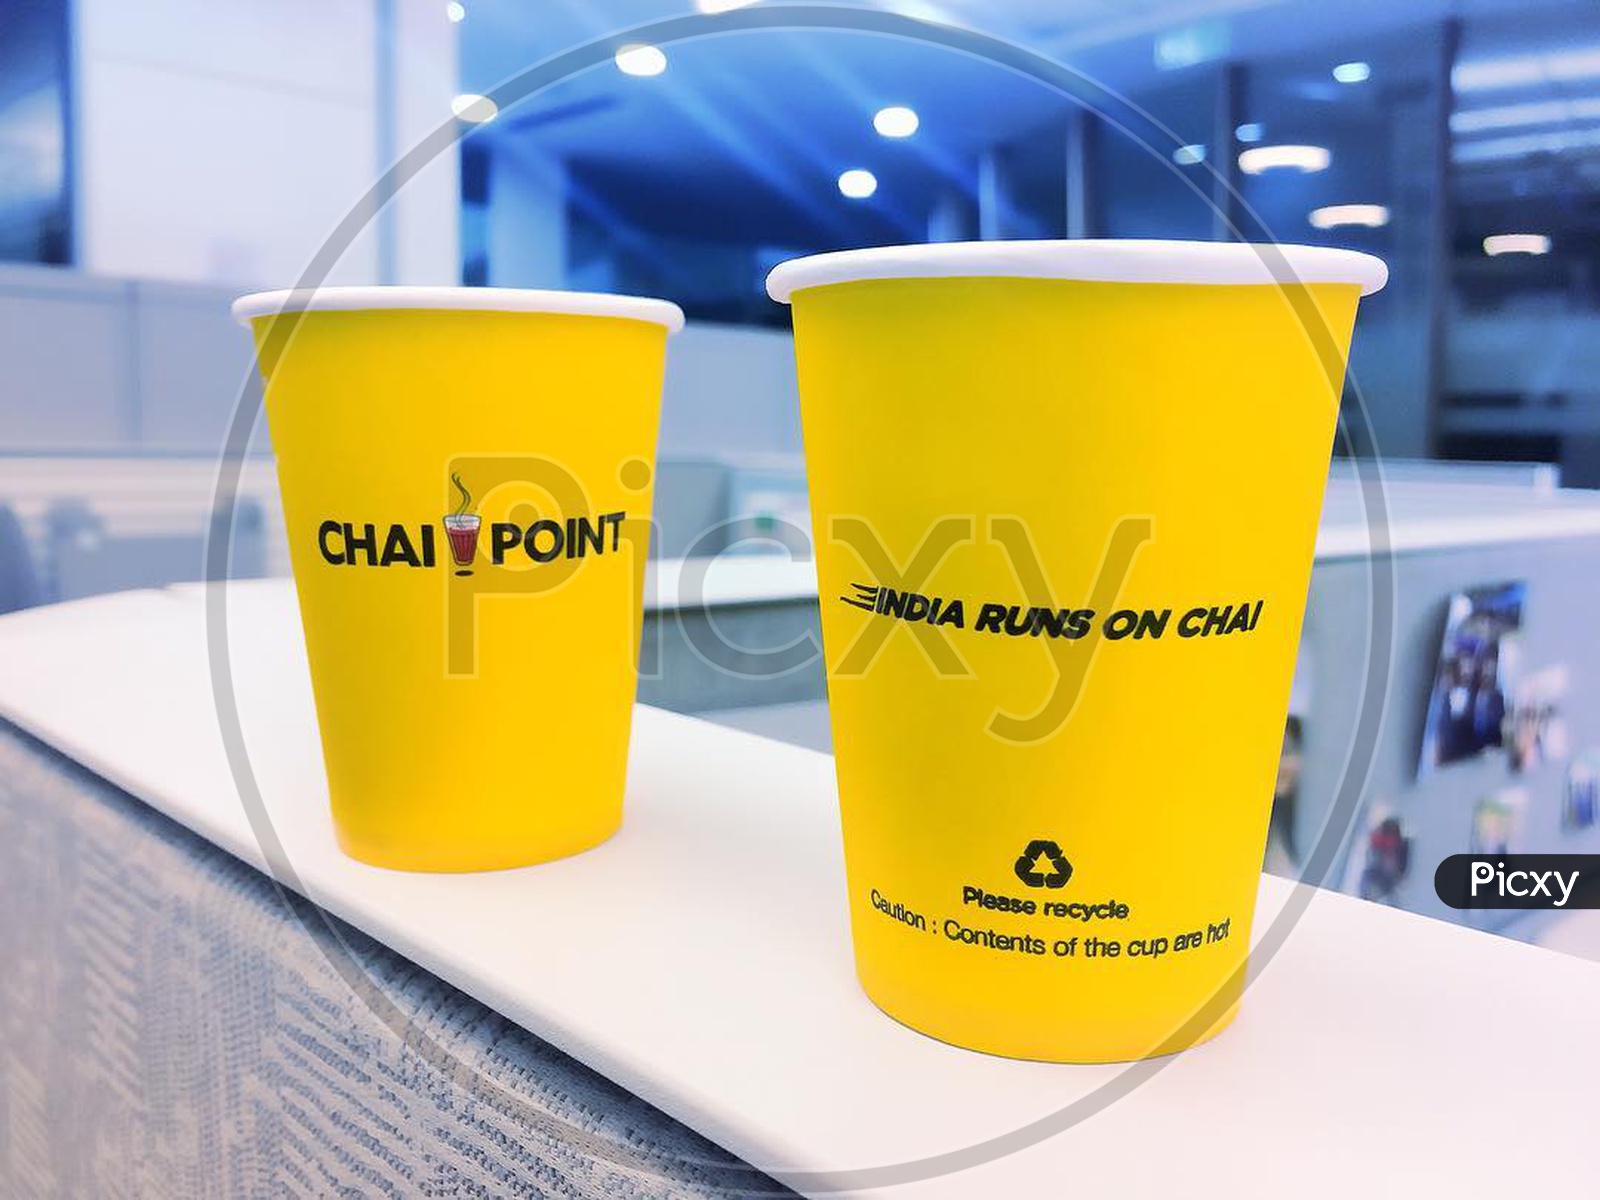 Chaipoint tea cups in office at cubicles